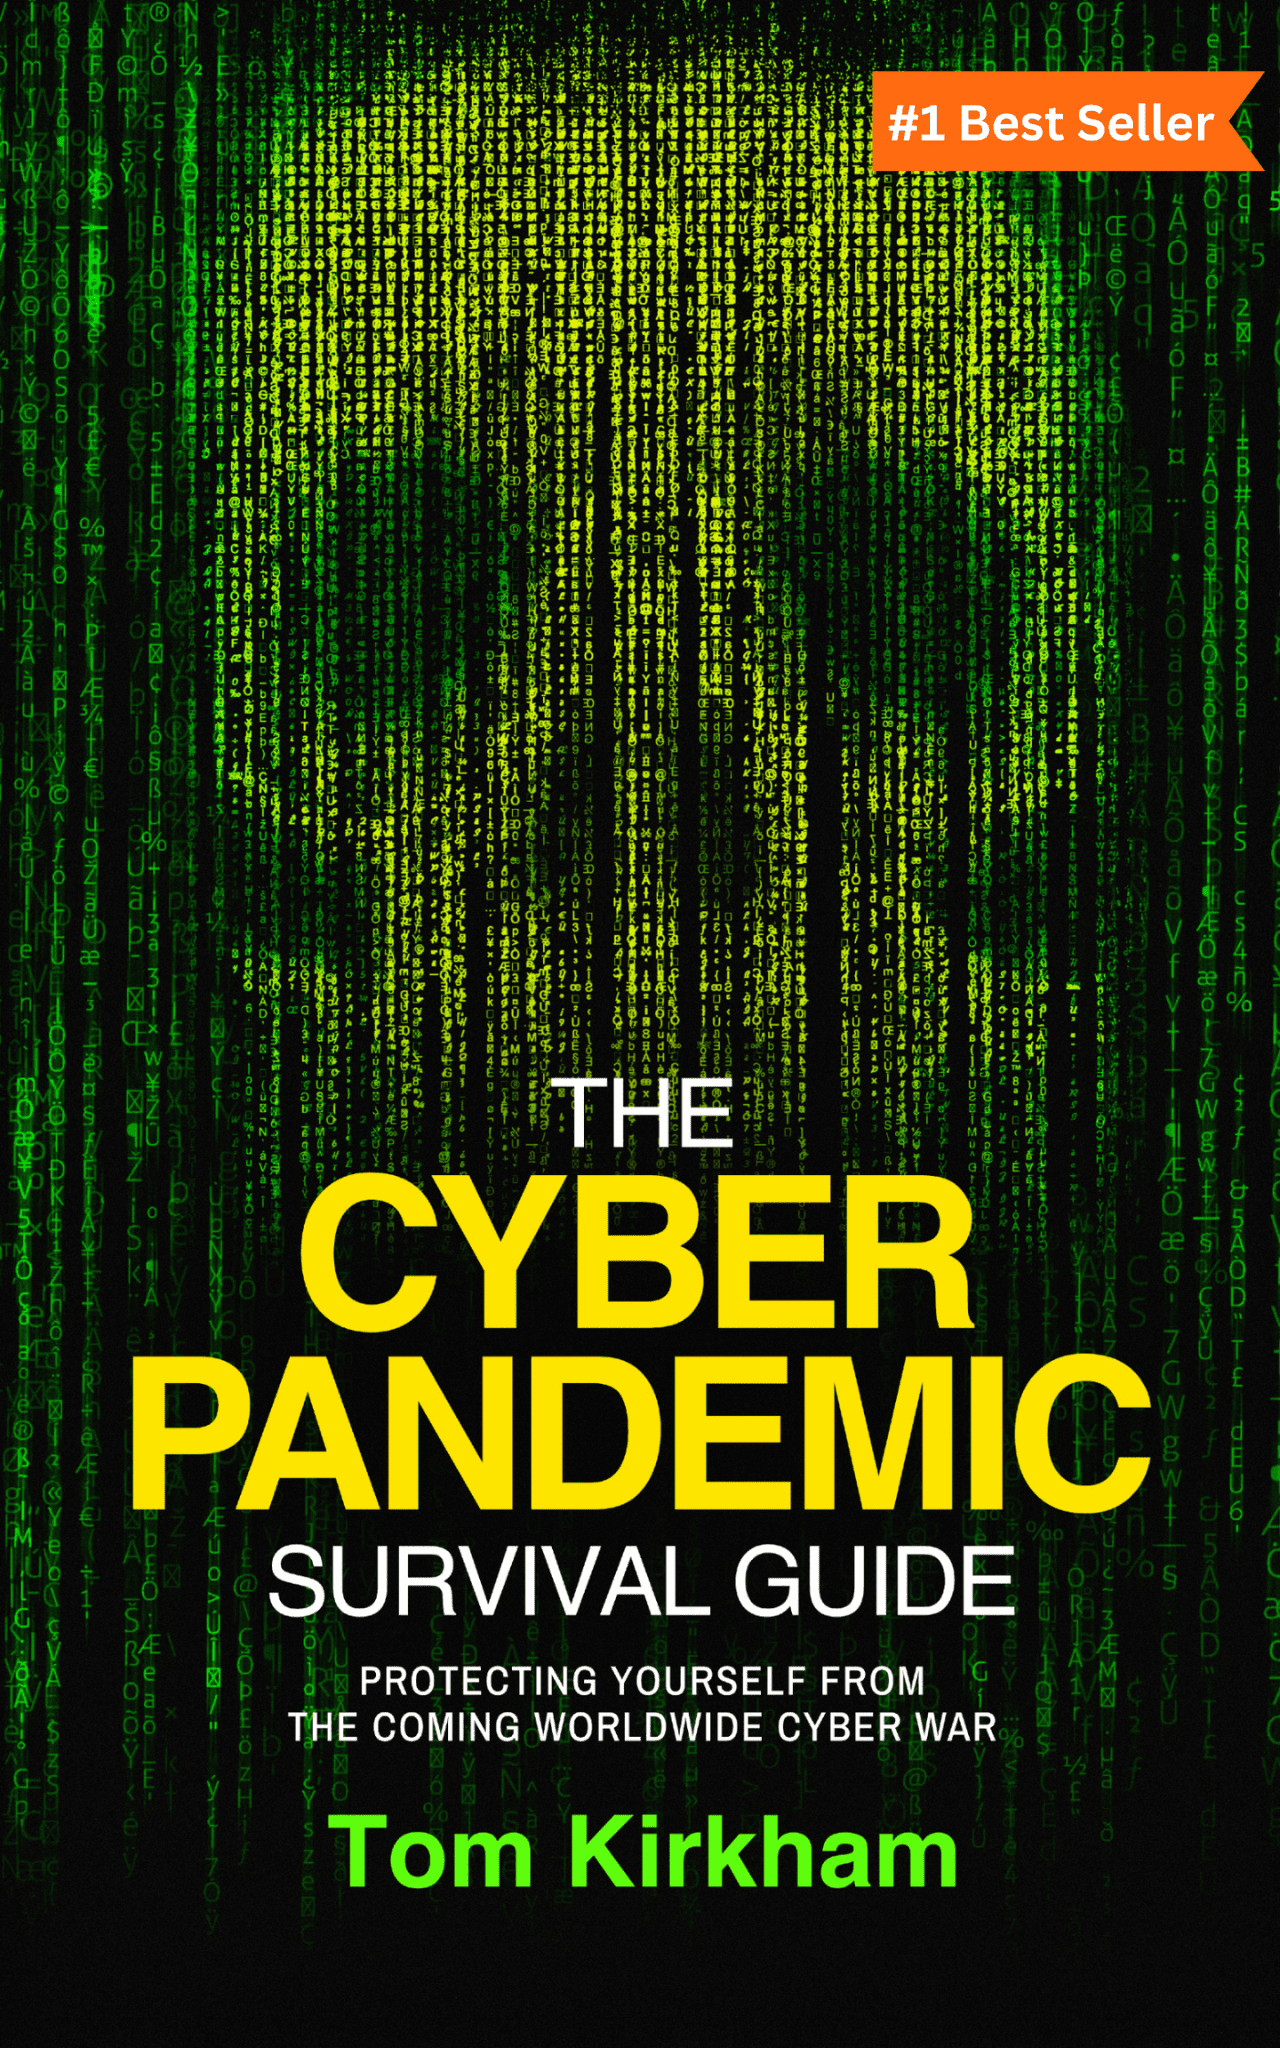 the cyber pandemic survival guide by Tom Kirkham